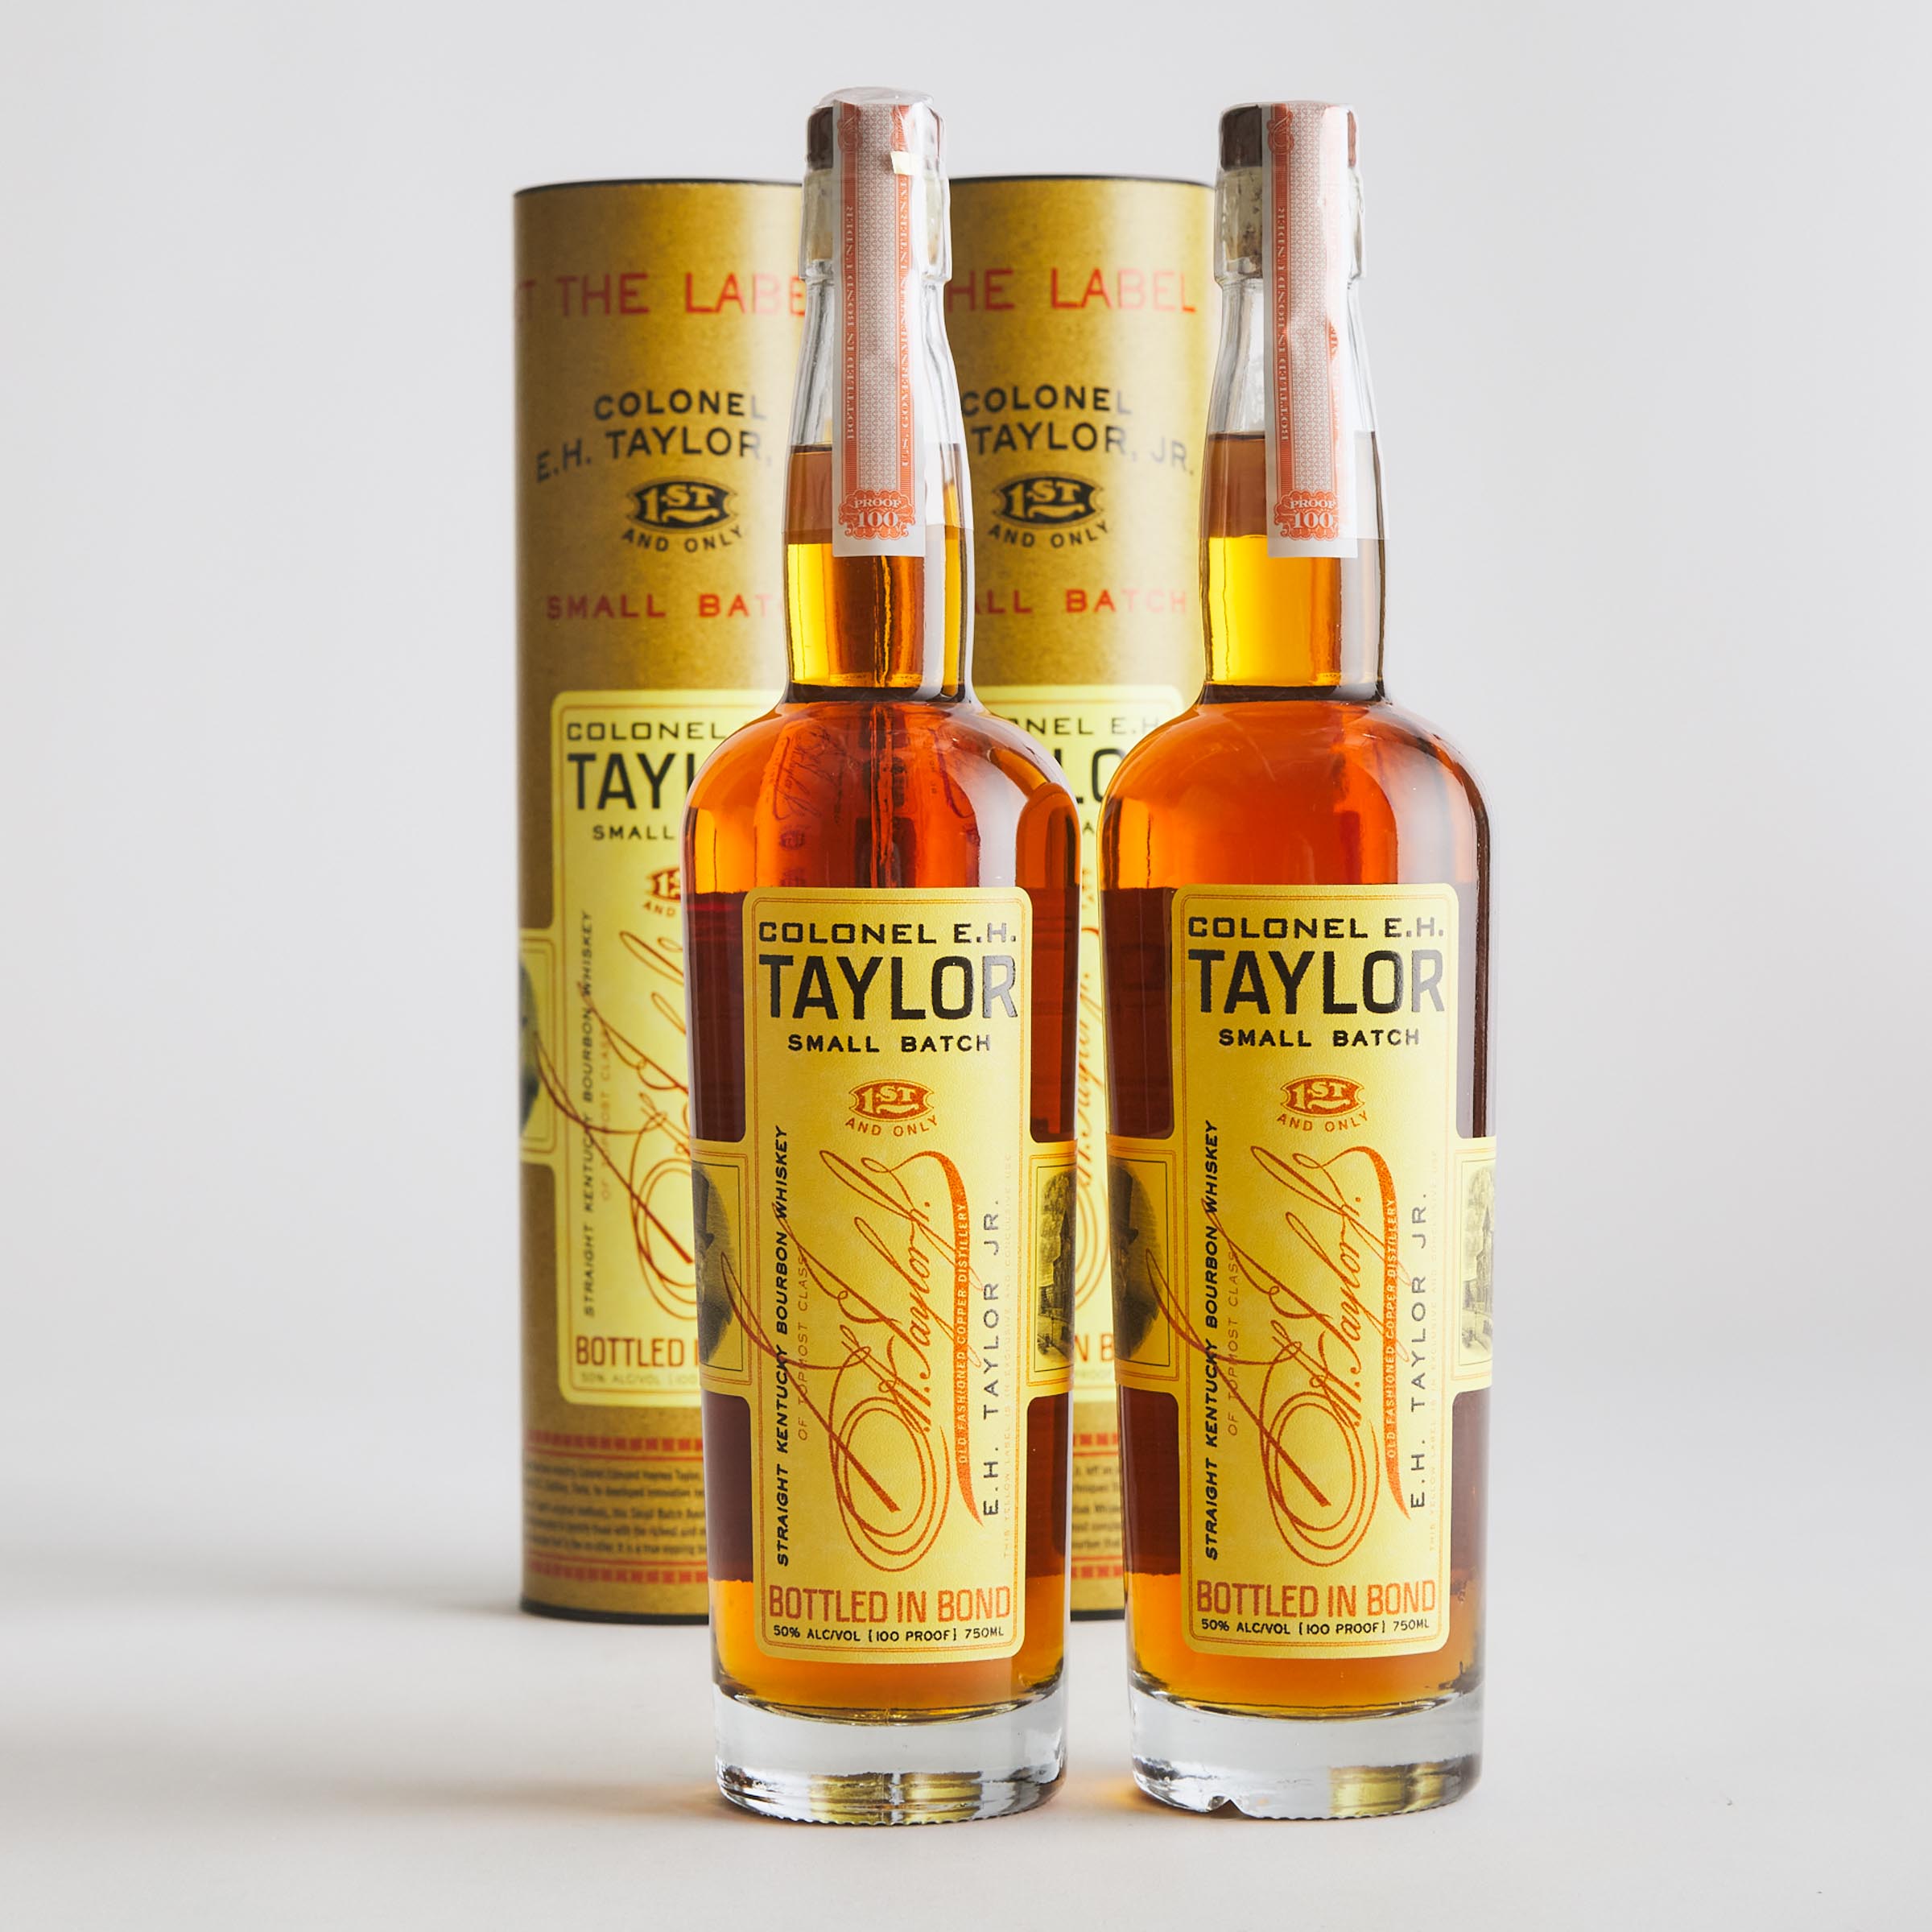 COLONEL E.H.TAYLOR JR. SMALL BATCH STRAIGHT KENTUCKY BOURBON WHISKEY (TWO 750 ML)